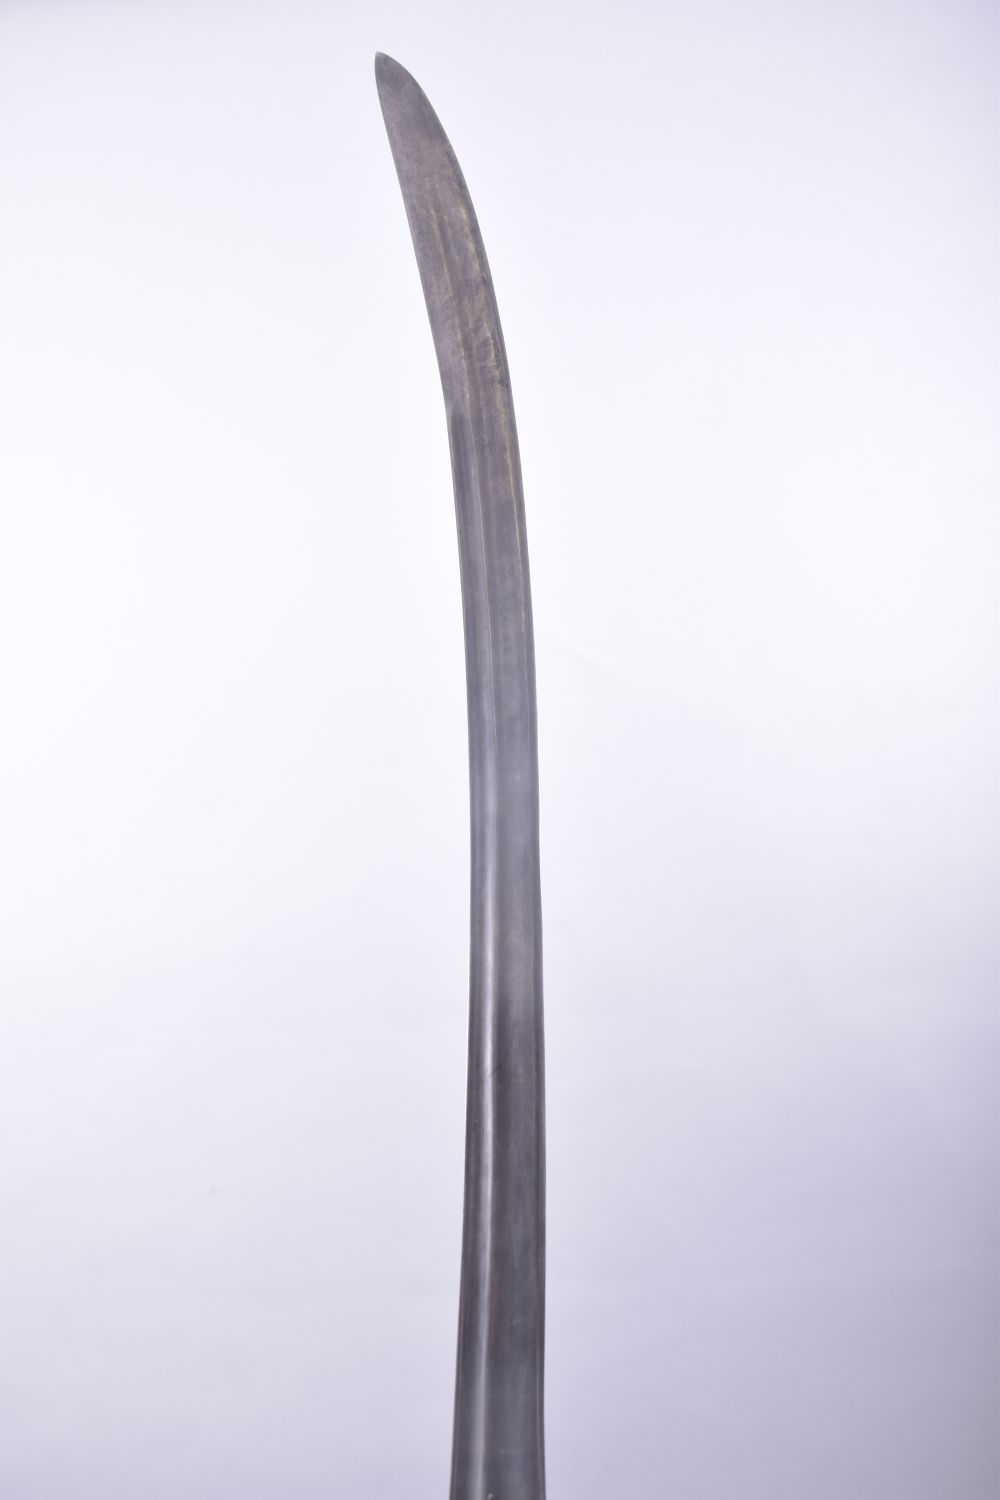 A FINE 18TH CENTURY INDIAN WATERED STEEL TULWAR SWORD, with silver inlaid handle, 88.5cm long. - Image 2 of 7